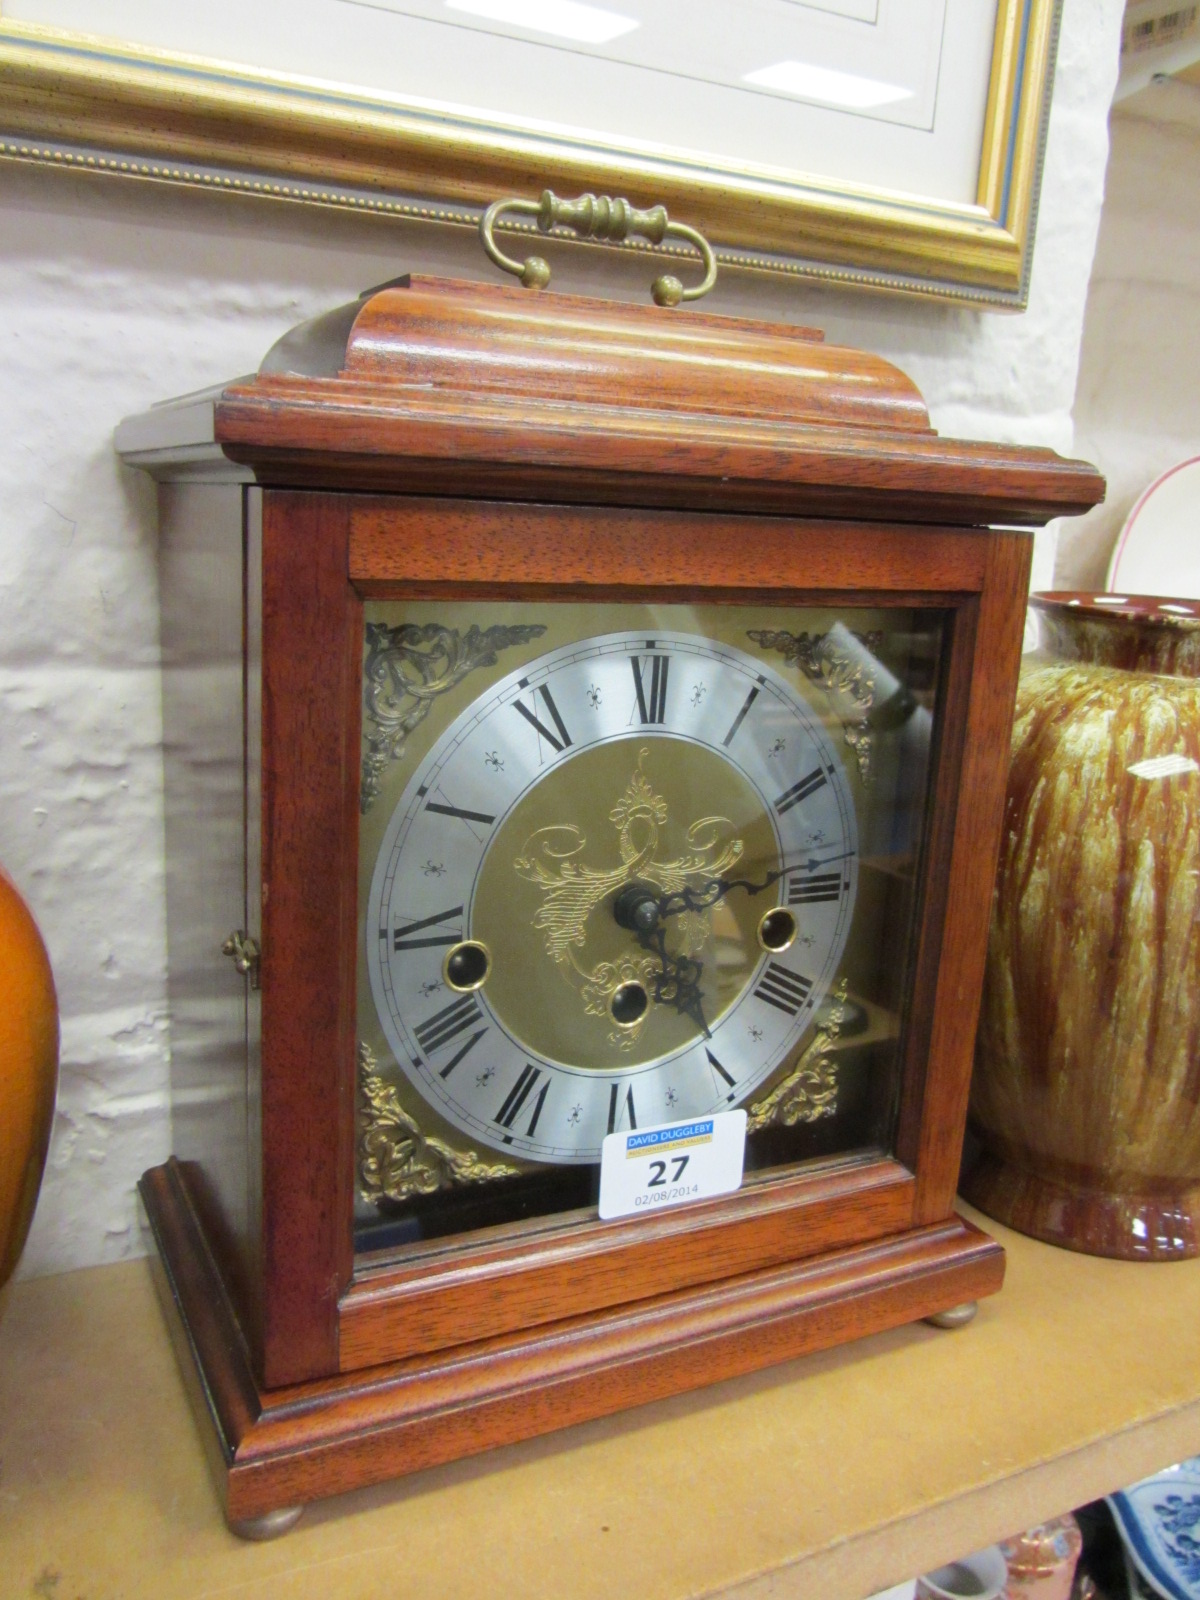 Mahogany cased mantle clock with Frandz Hermle chiming movement, 28cm